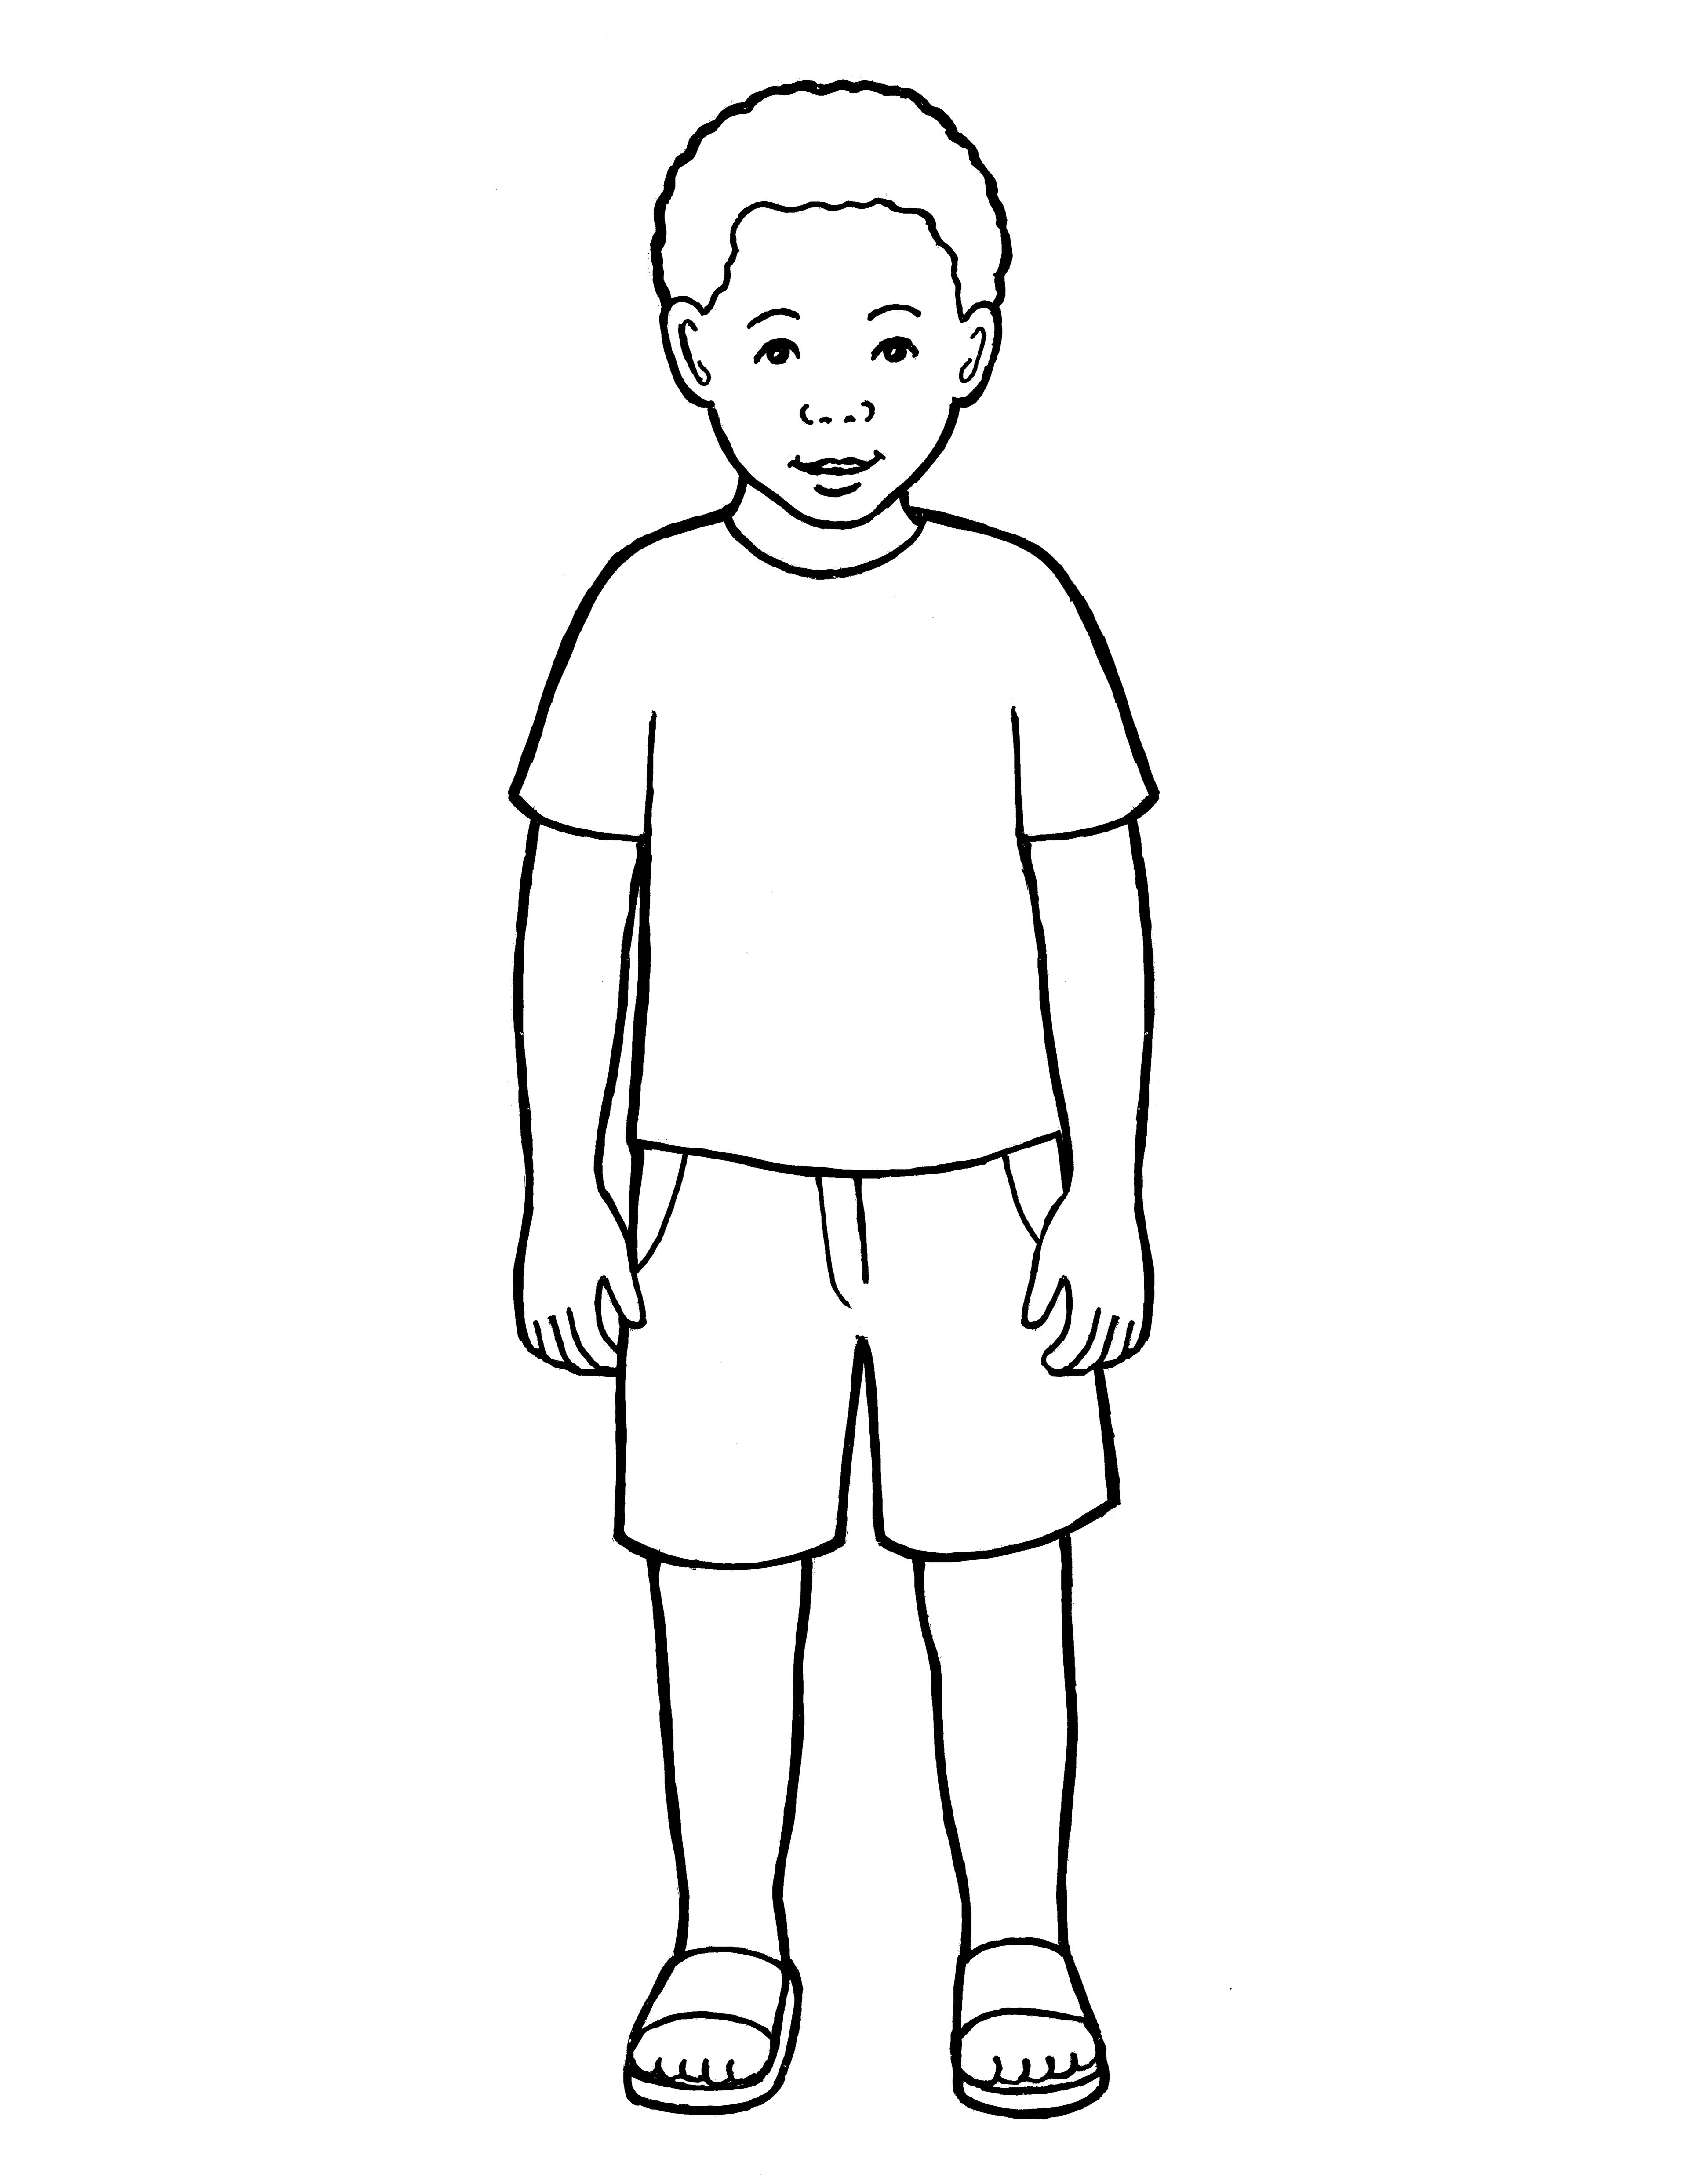 An illustration of a Primary-age boy standing, from the nursery manual Behold Your Little Ones (2008), page 47.